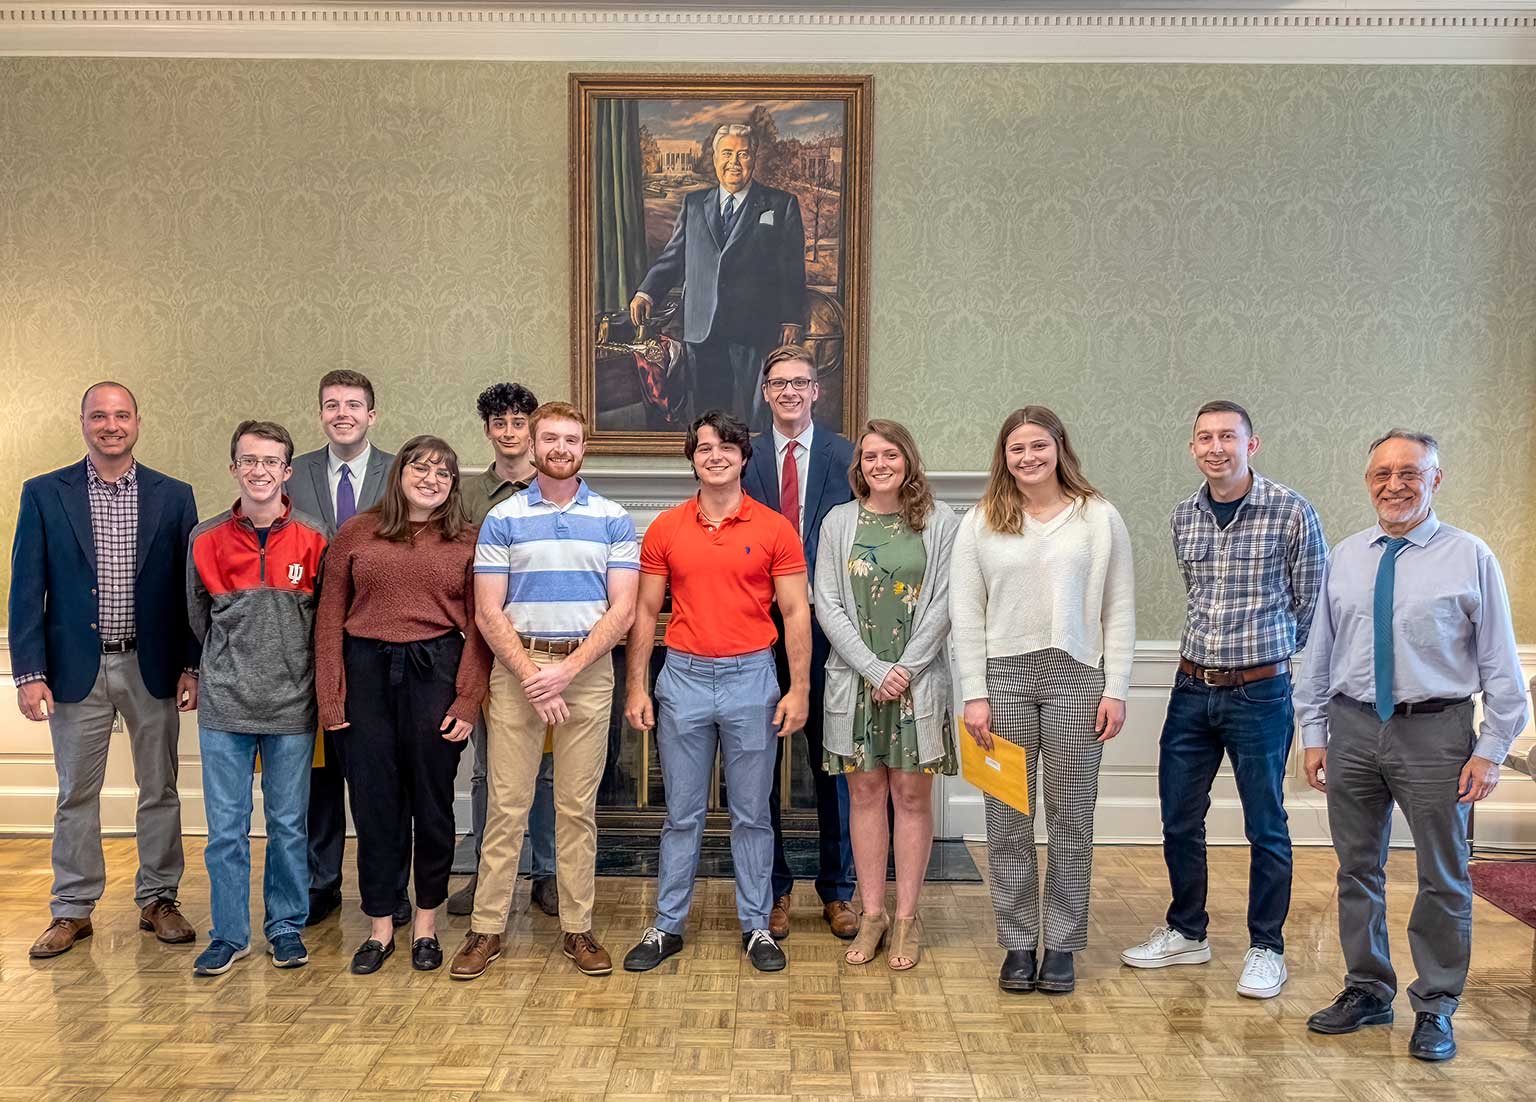 A group of undergraduate economics students pose in the Indiana Memorial Union, with a portrait of Herman B Wells above them.